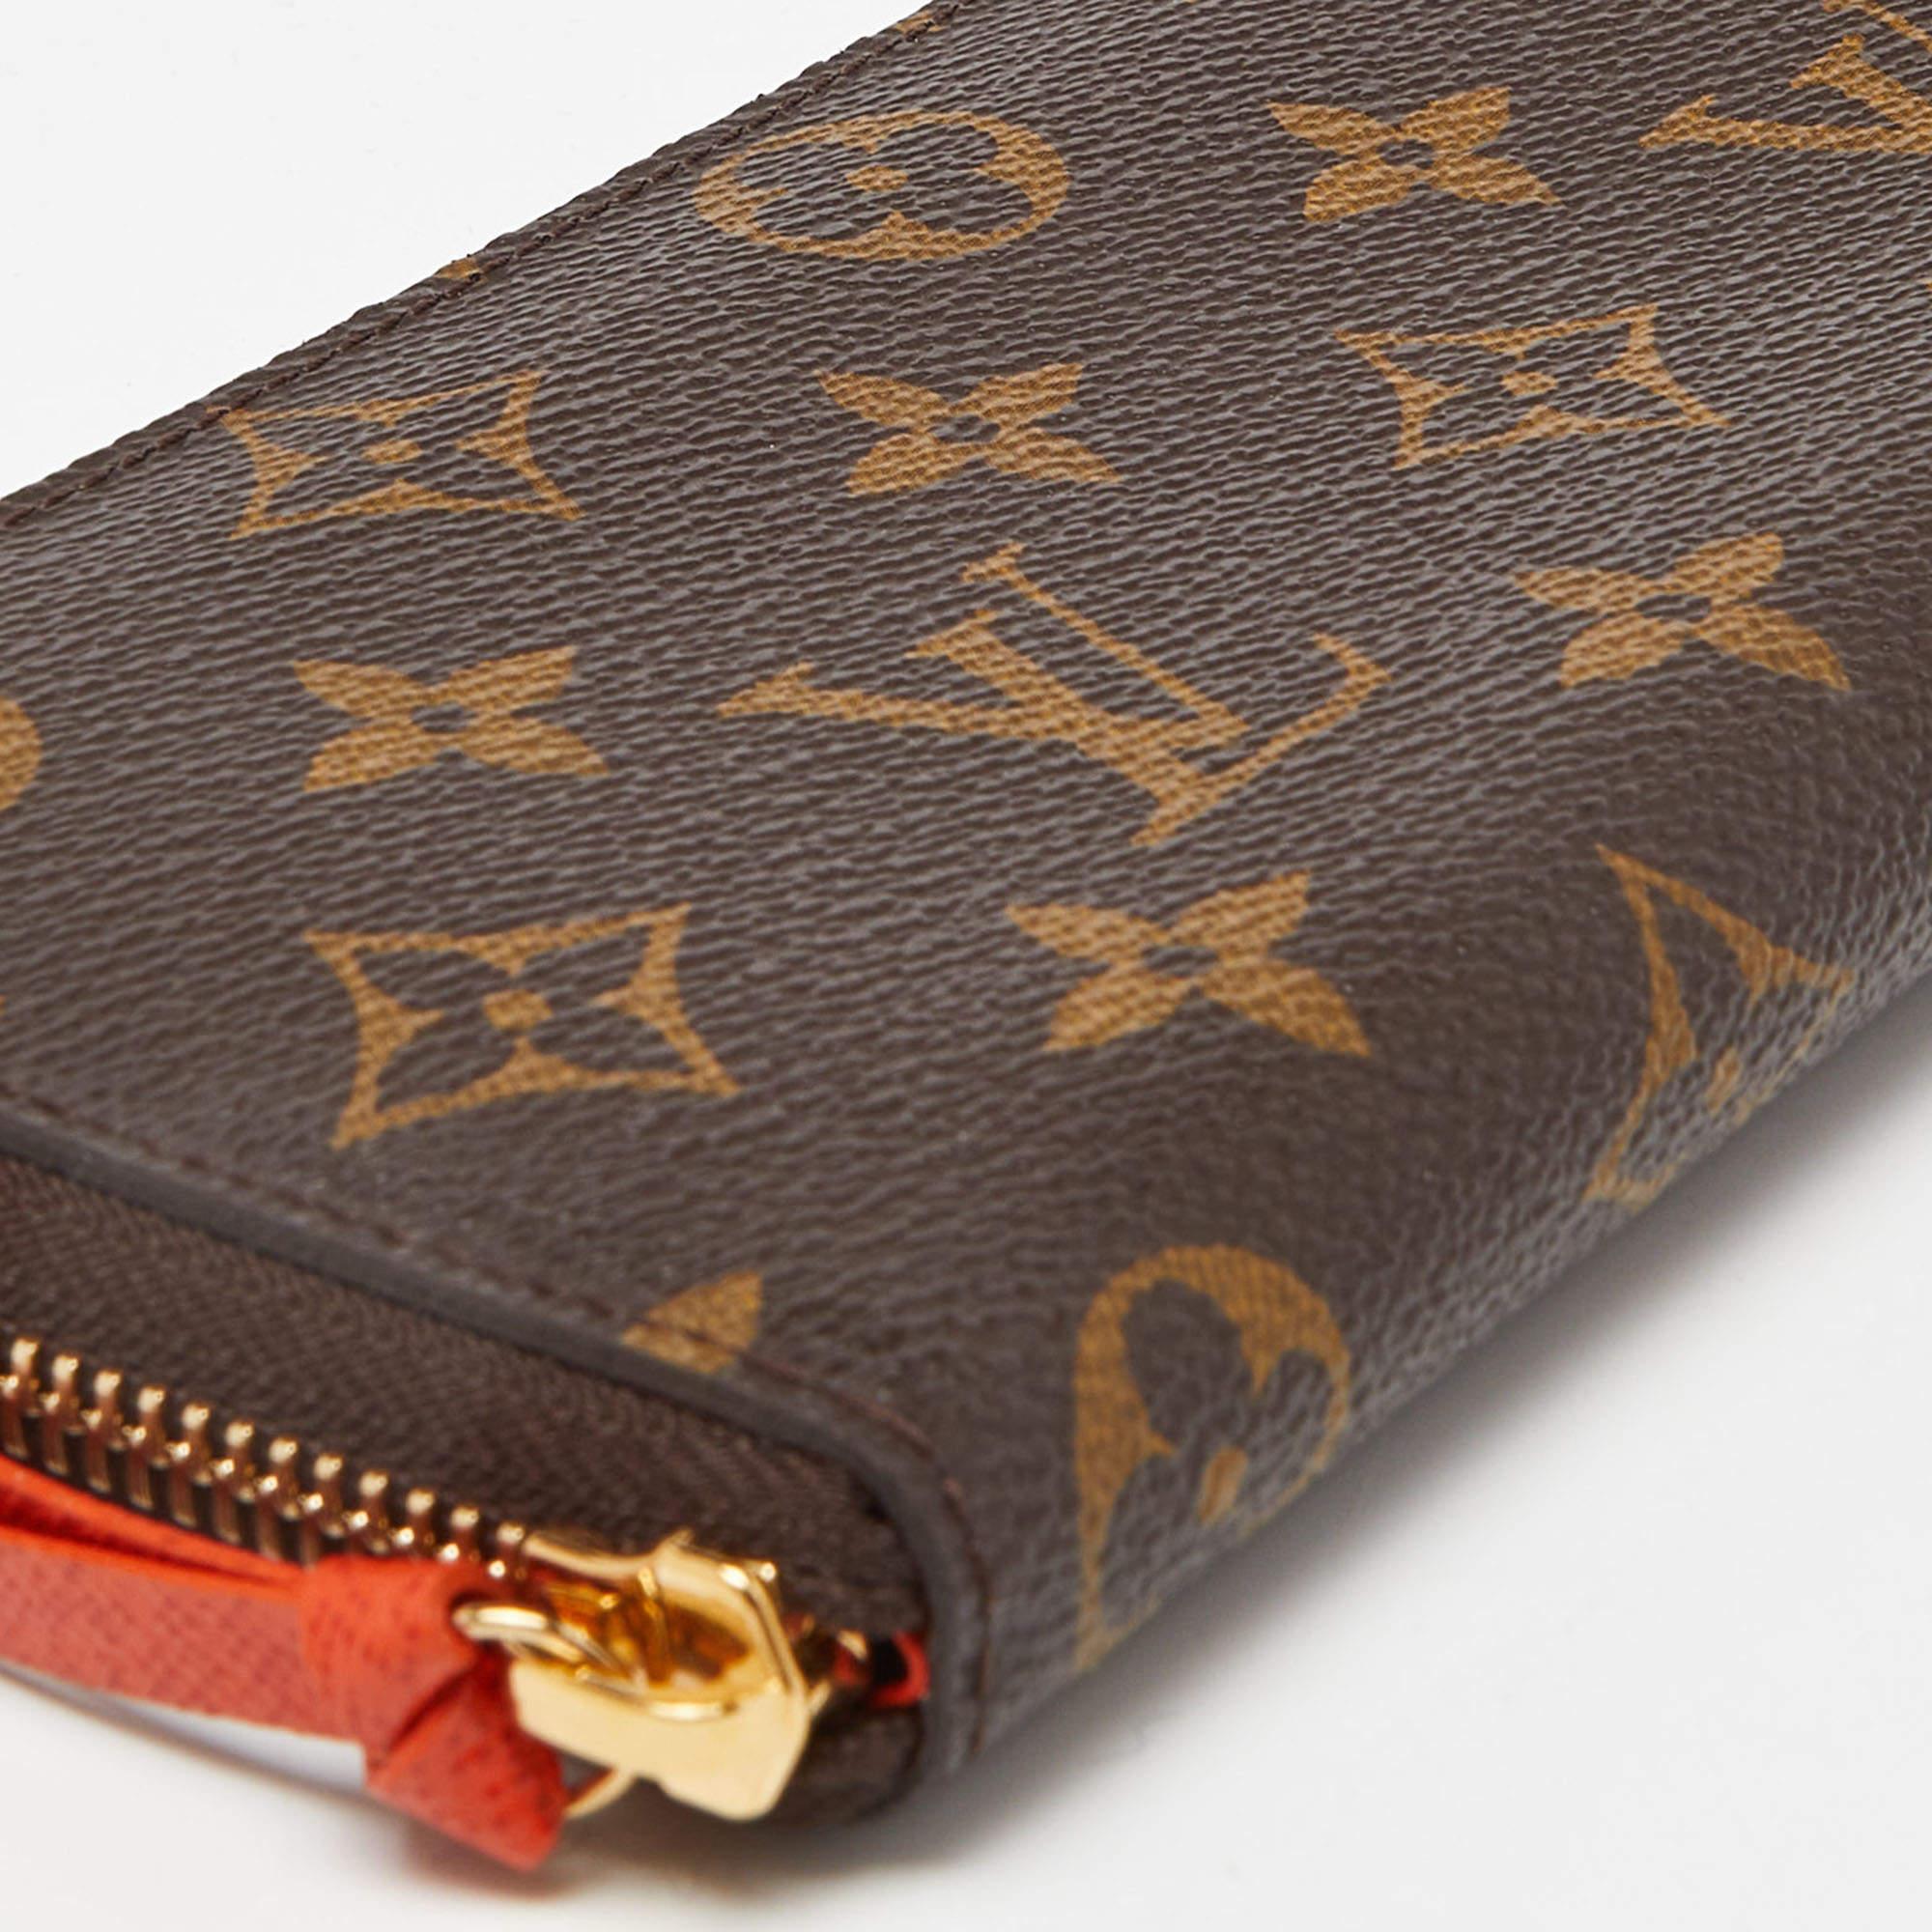 This LV wallet is an immaculate balance of sophistication and rational utility. It has been designed using prime quality materials and elevated by a sleek finish. The creation is equipped with ample space for your monetary